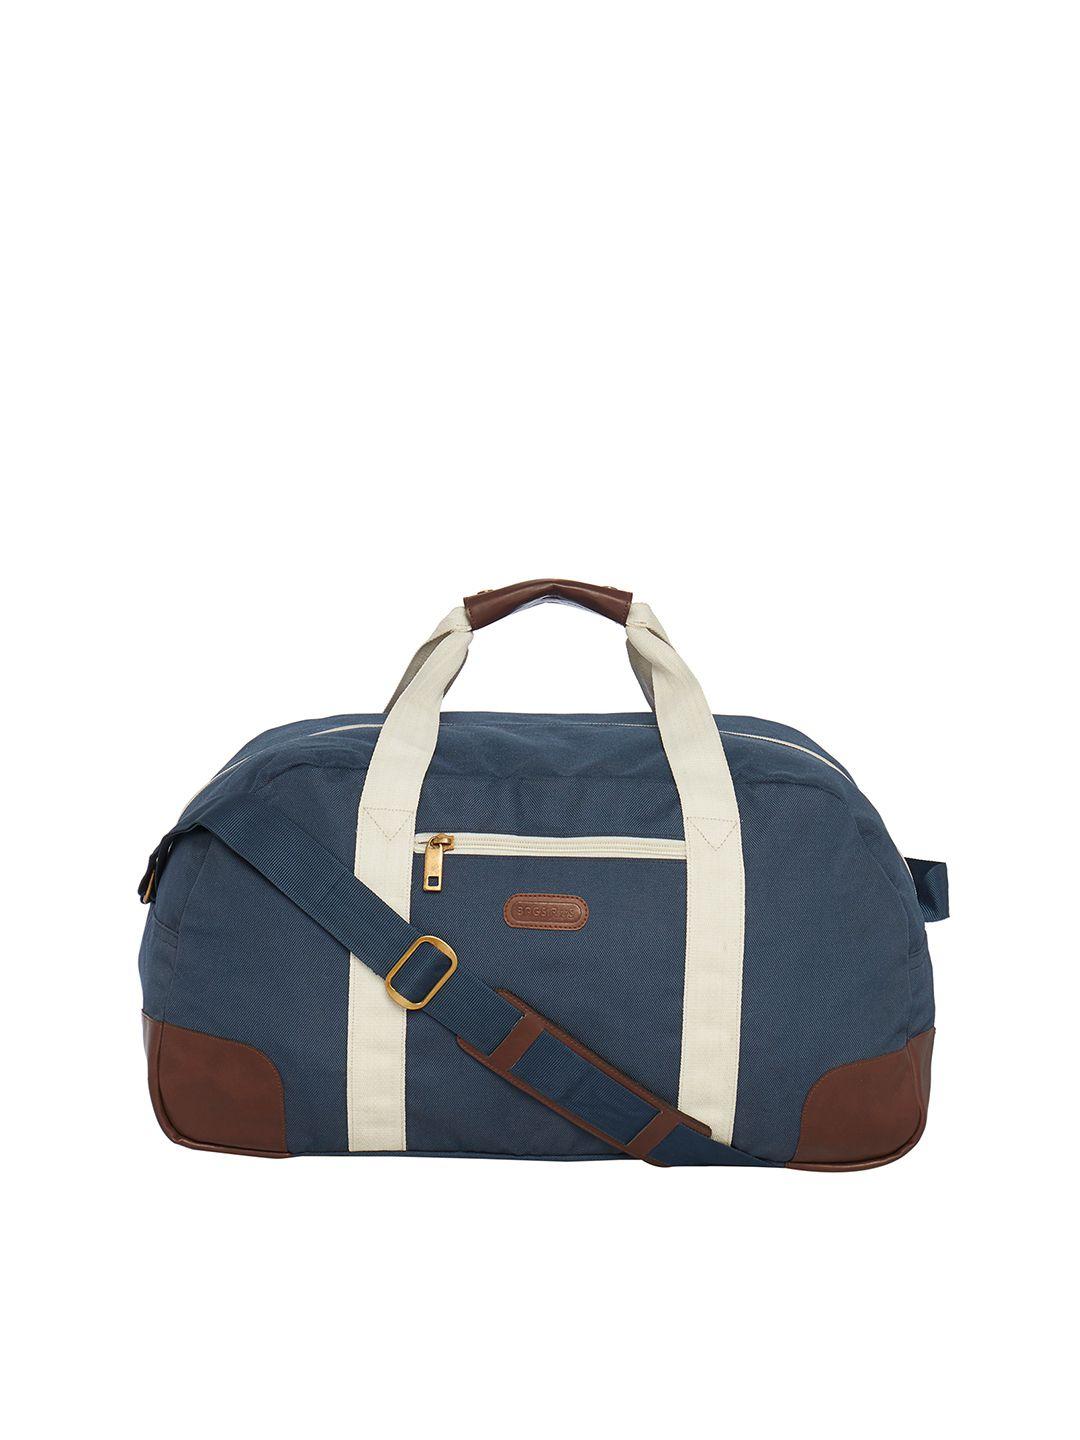 bags.r.us unisex navy foldable duffel bag with shoulder strap